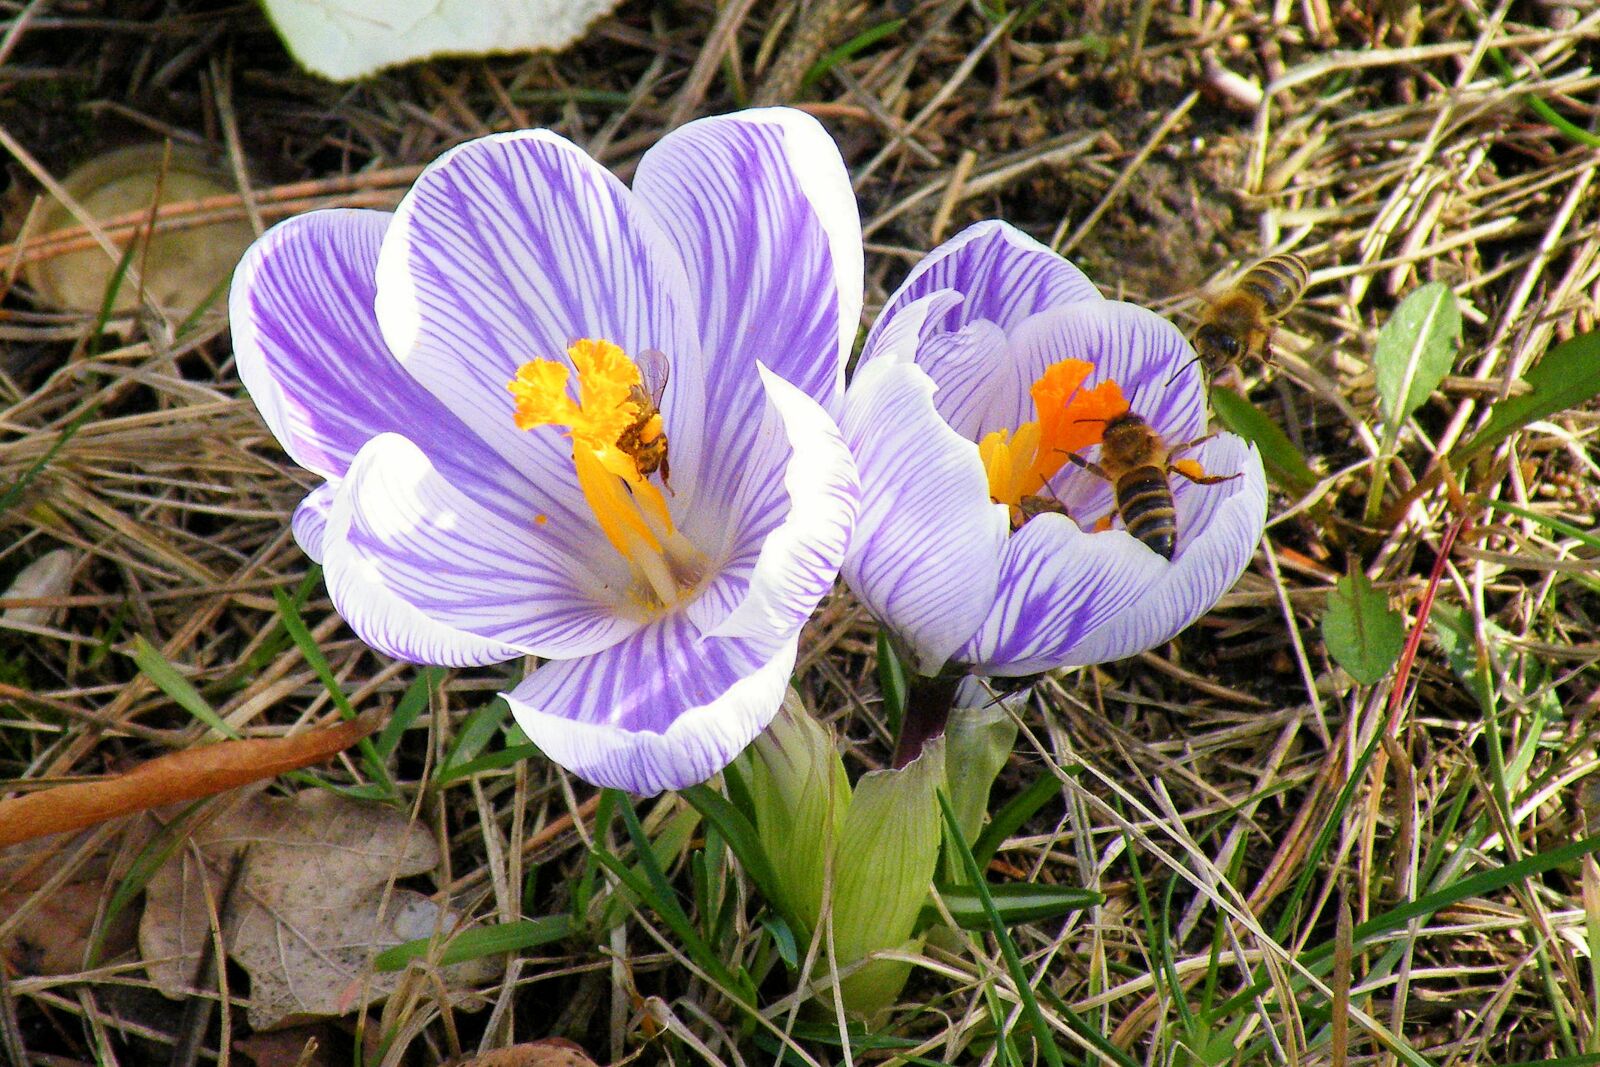 Fujifilm FinePix S8100fd sample photo. Crocus, bees, insect photography